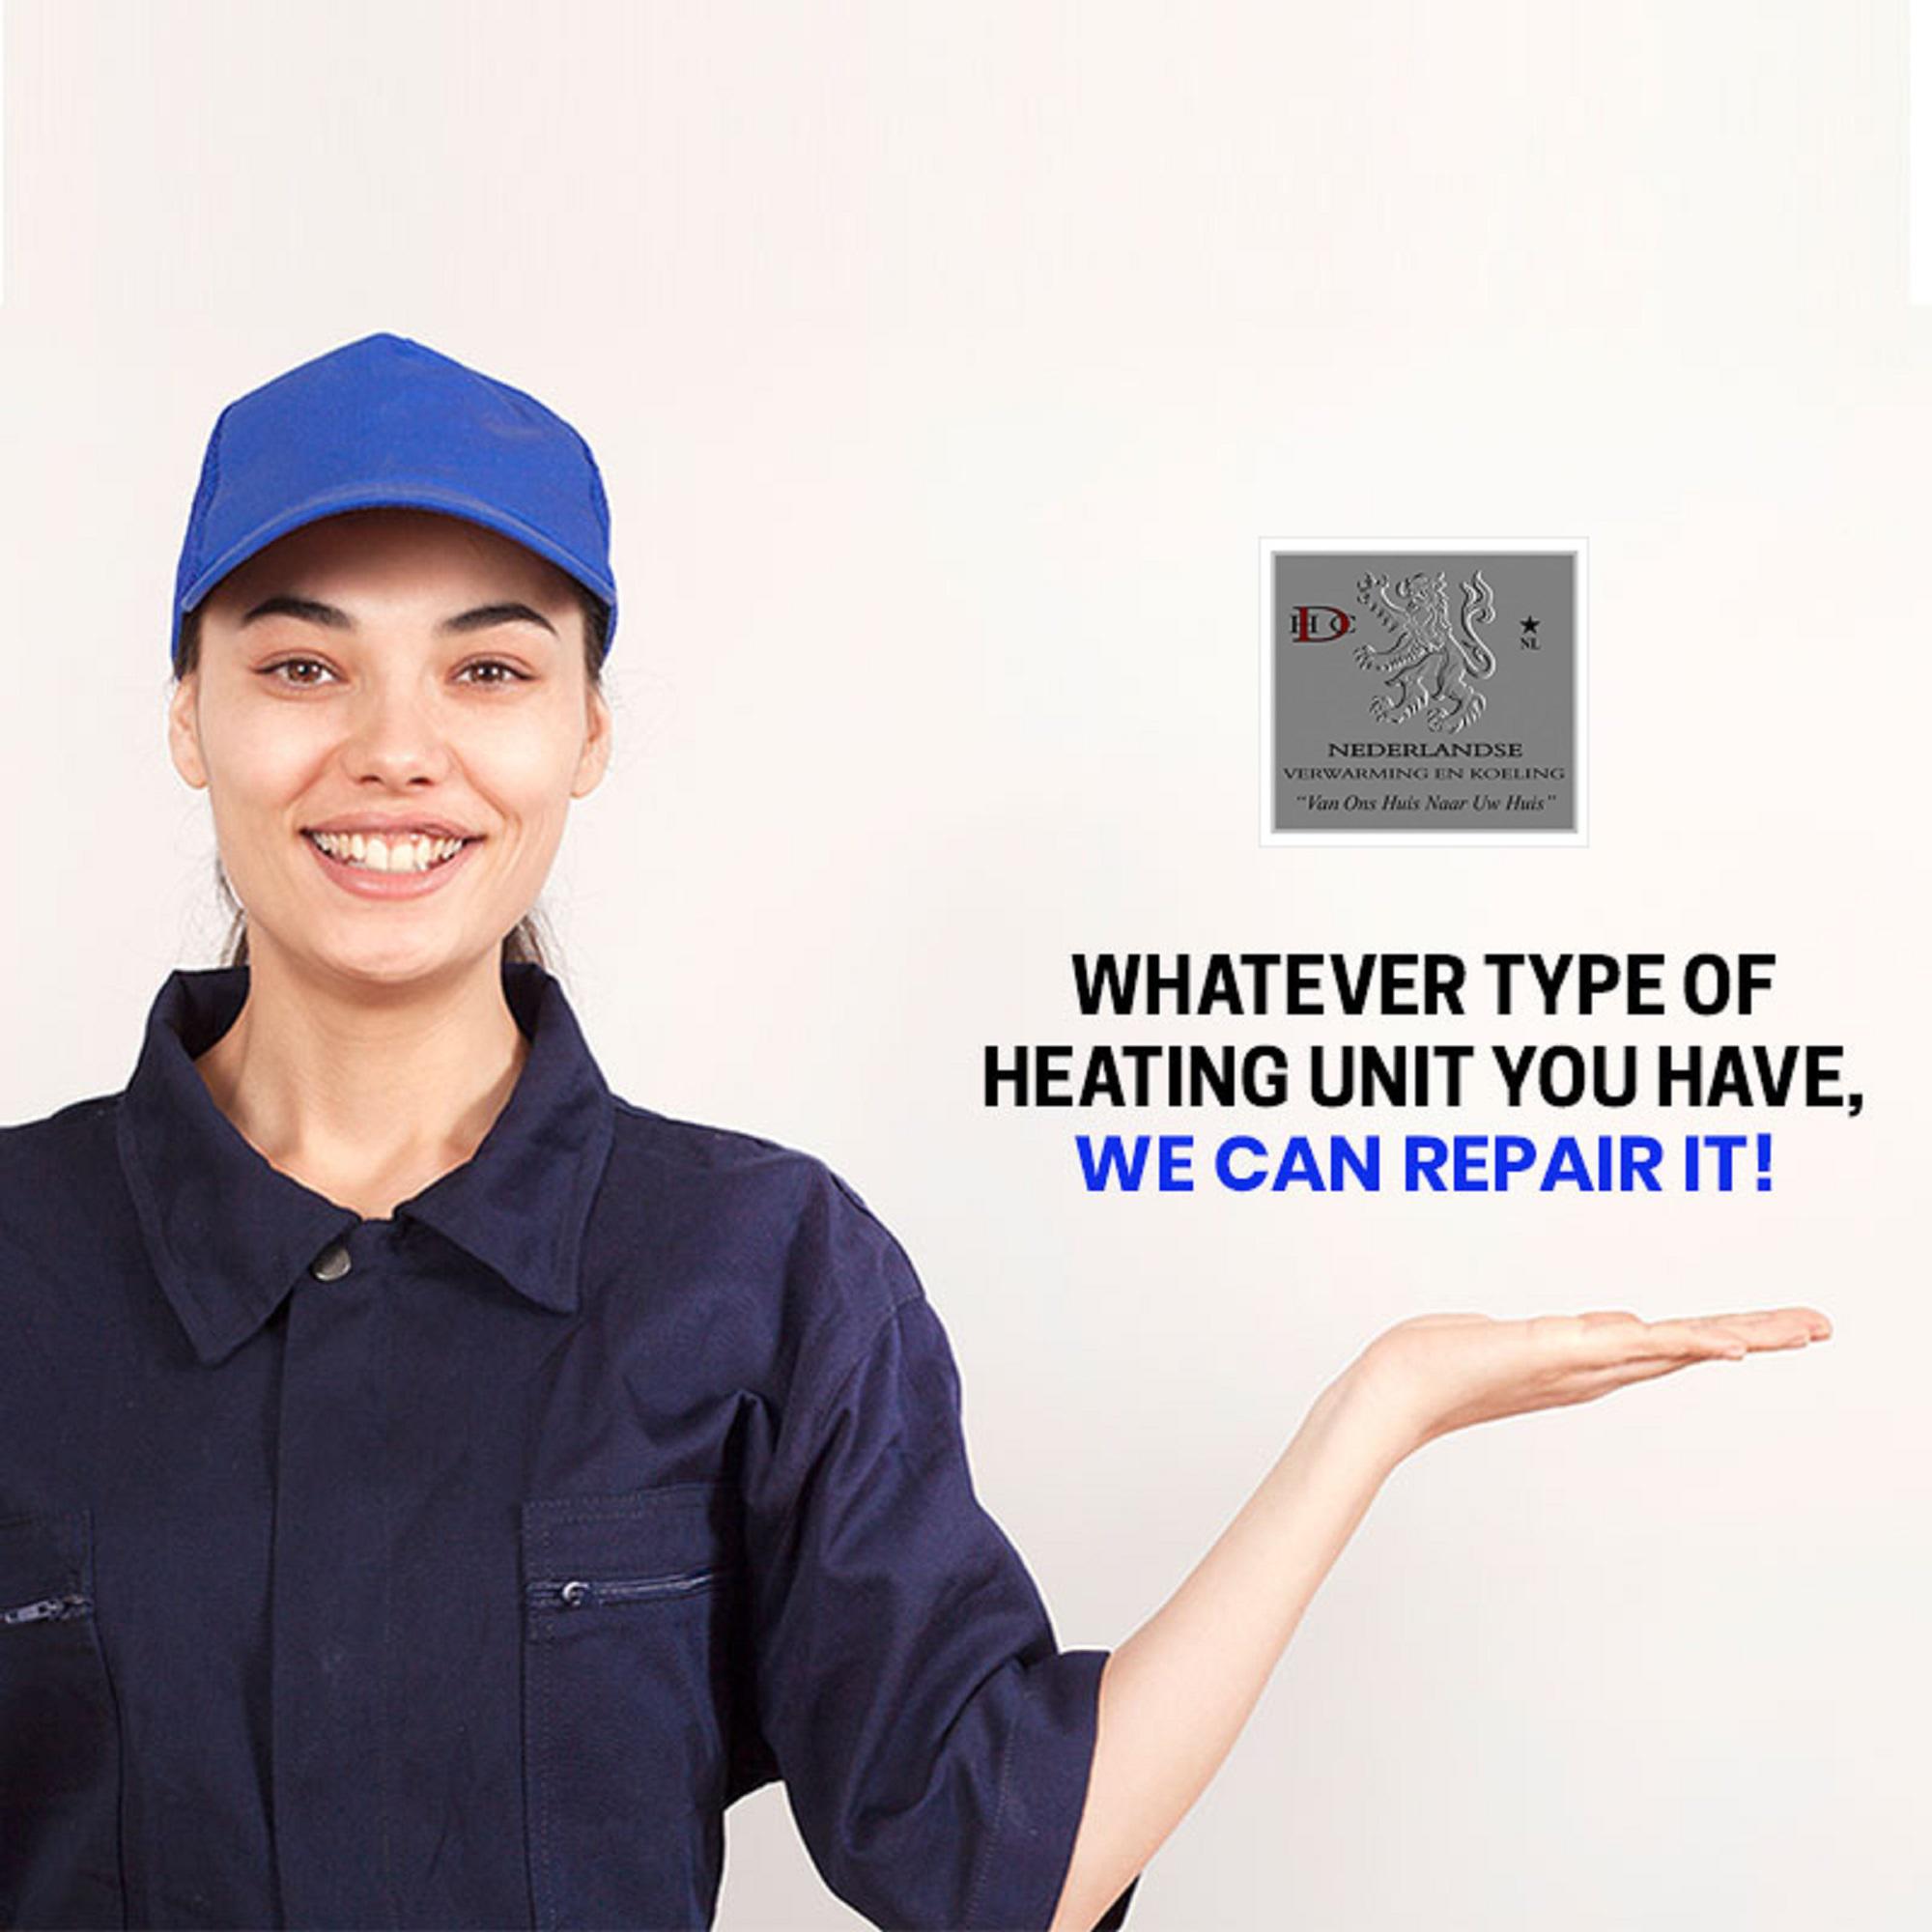 No matter which system you own, our expertise spans all kinds of heating appliances. Our well-trained HVAC experts can resolve all your heating repair issues in a short time. Contact us anytime and we're there for you!